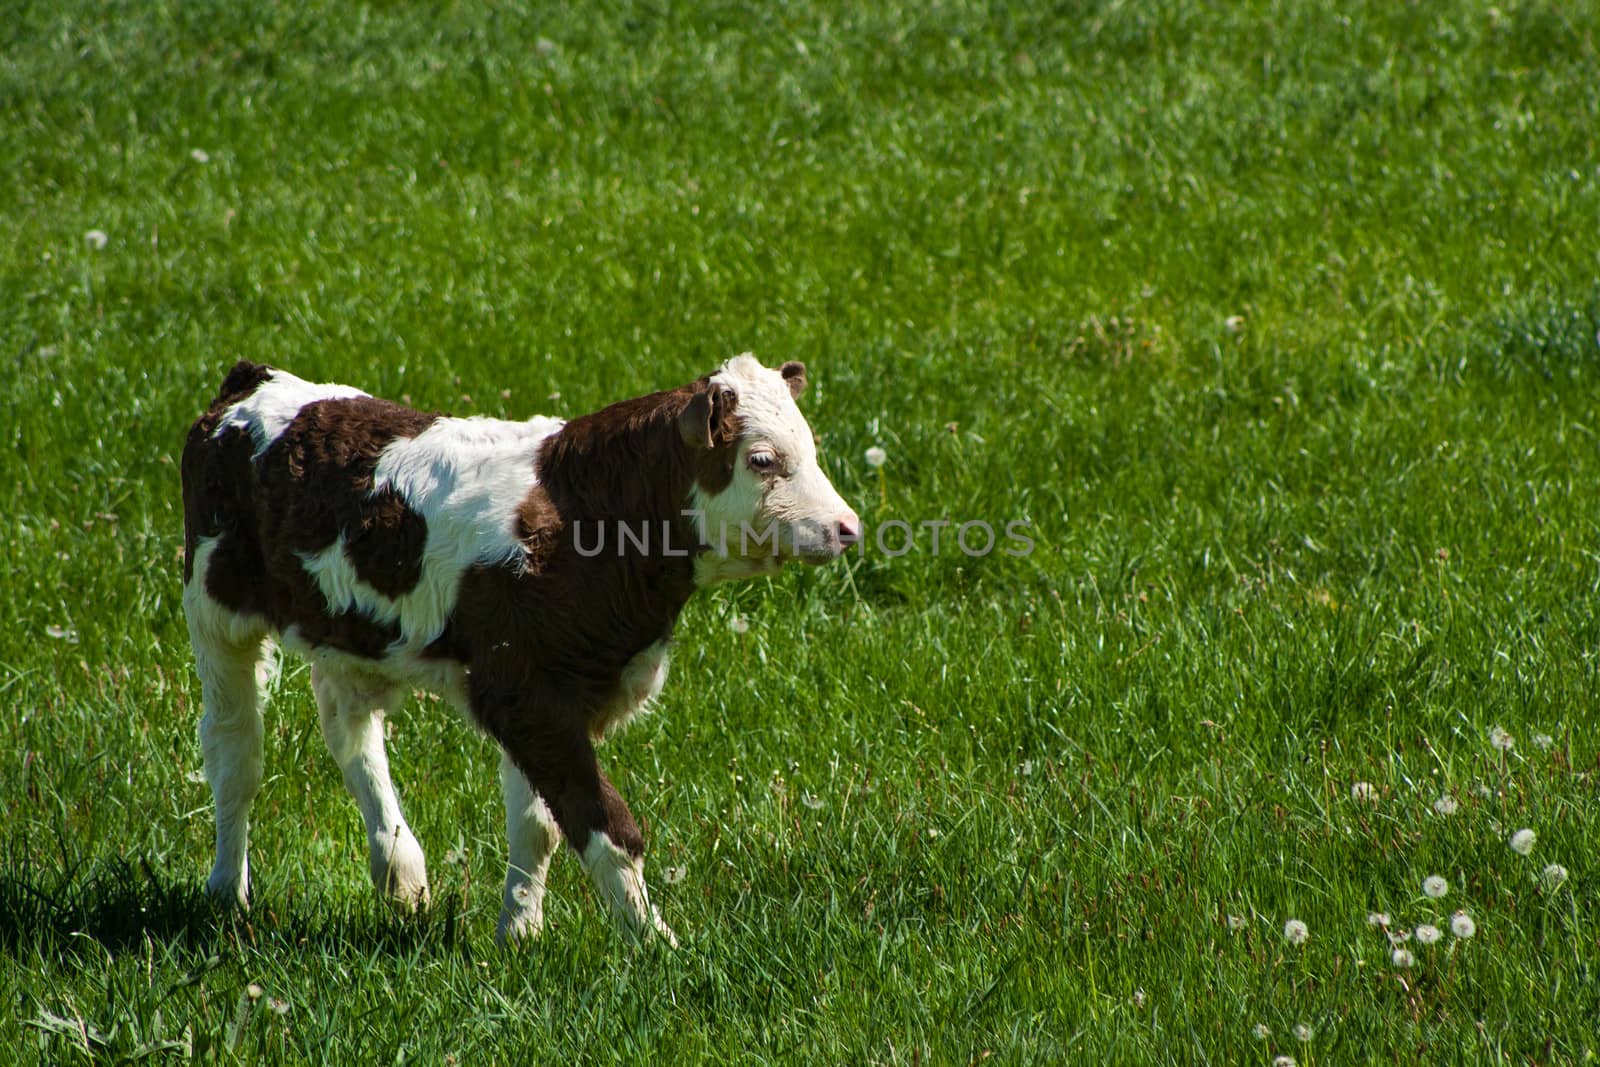 Photo of a cow standing in a field with hills.